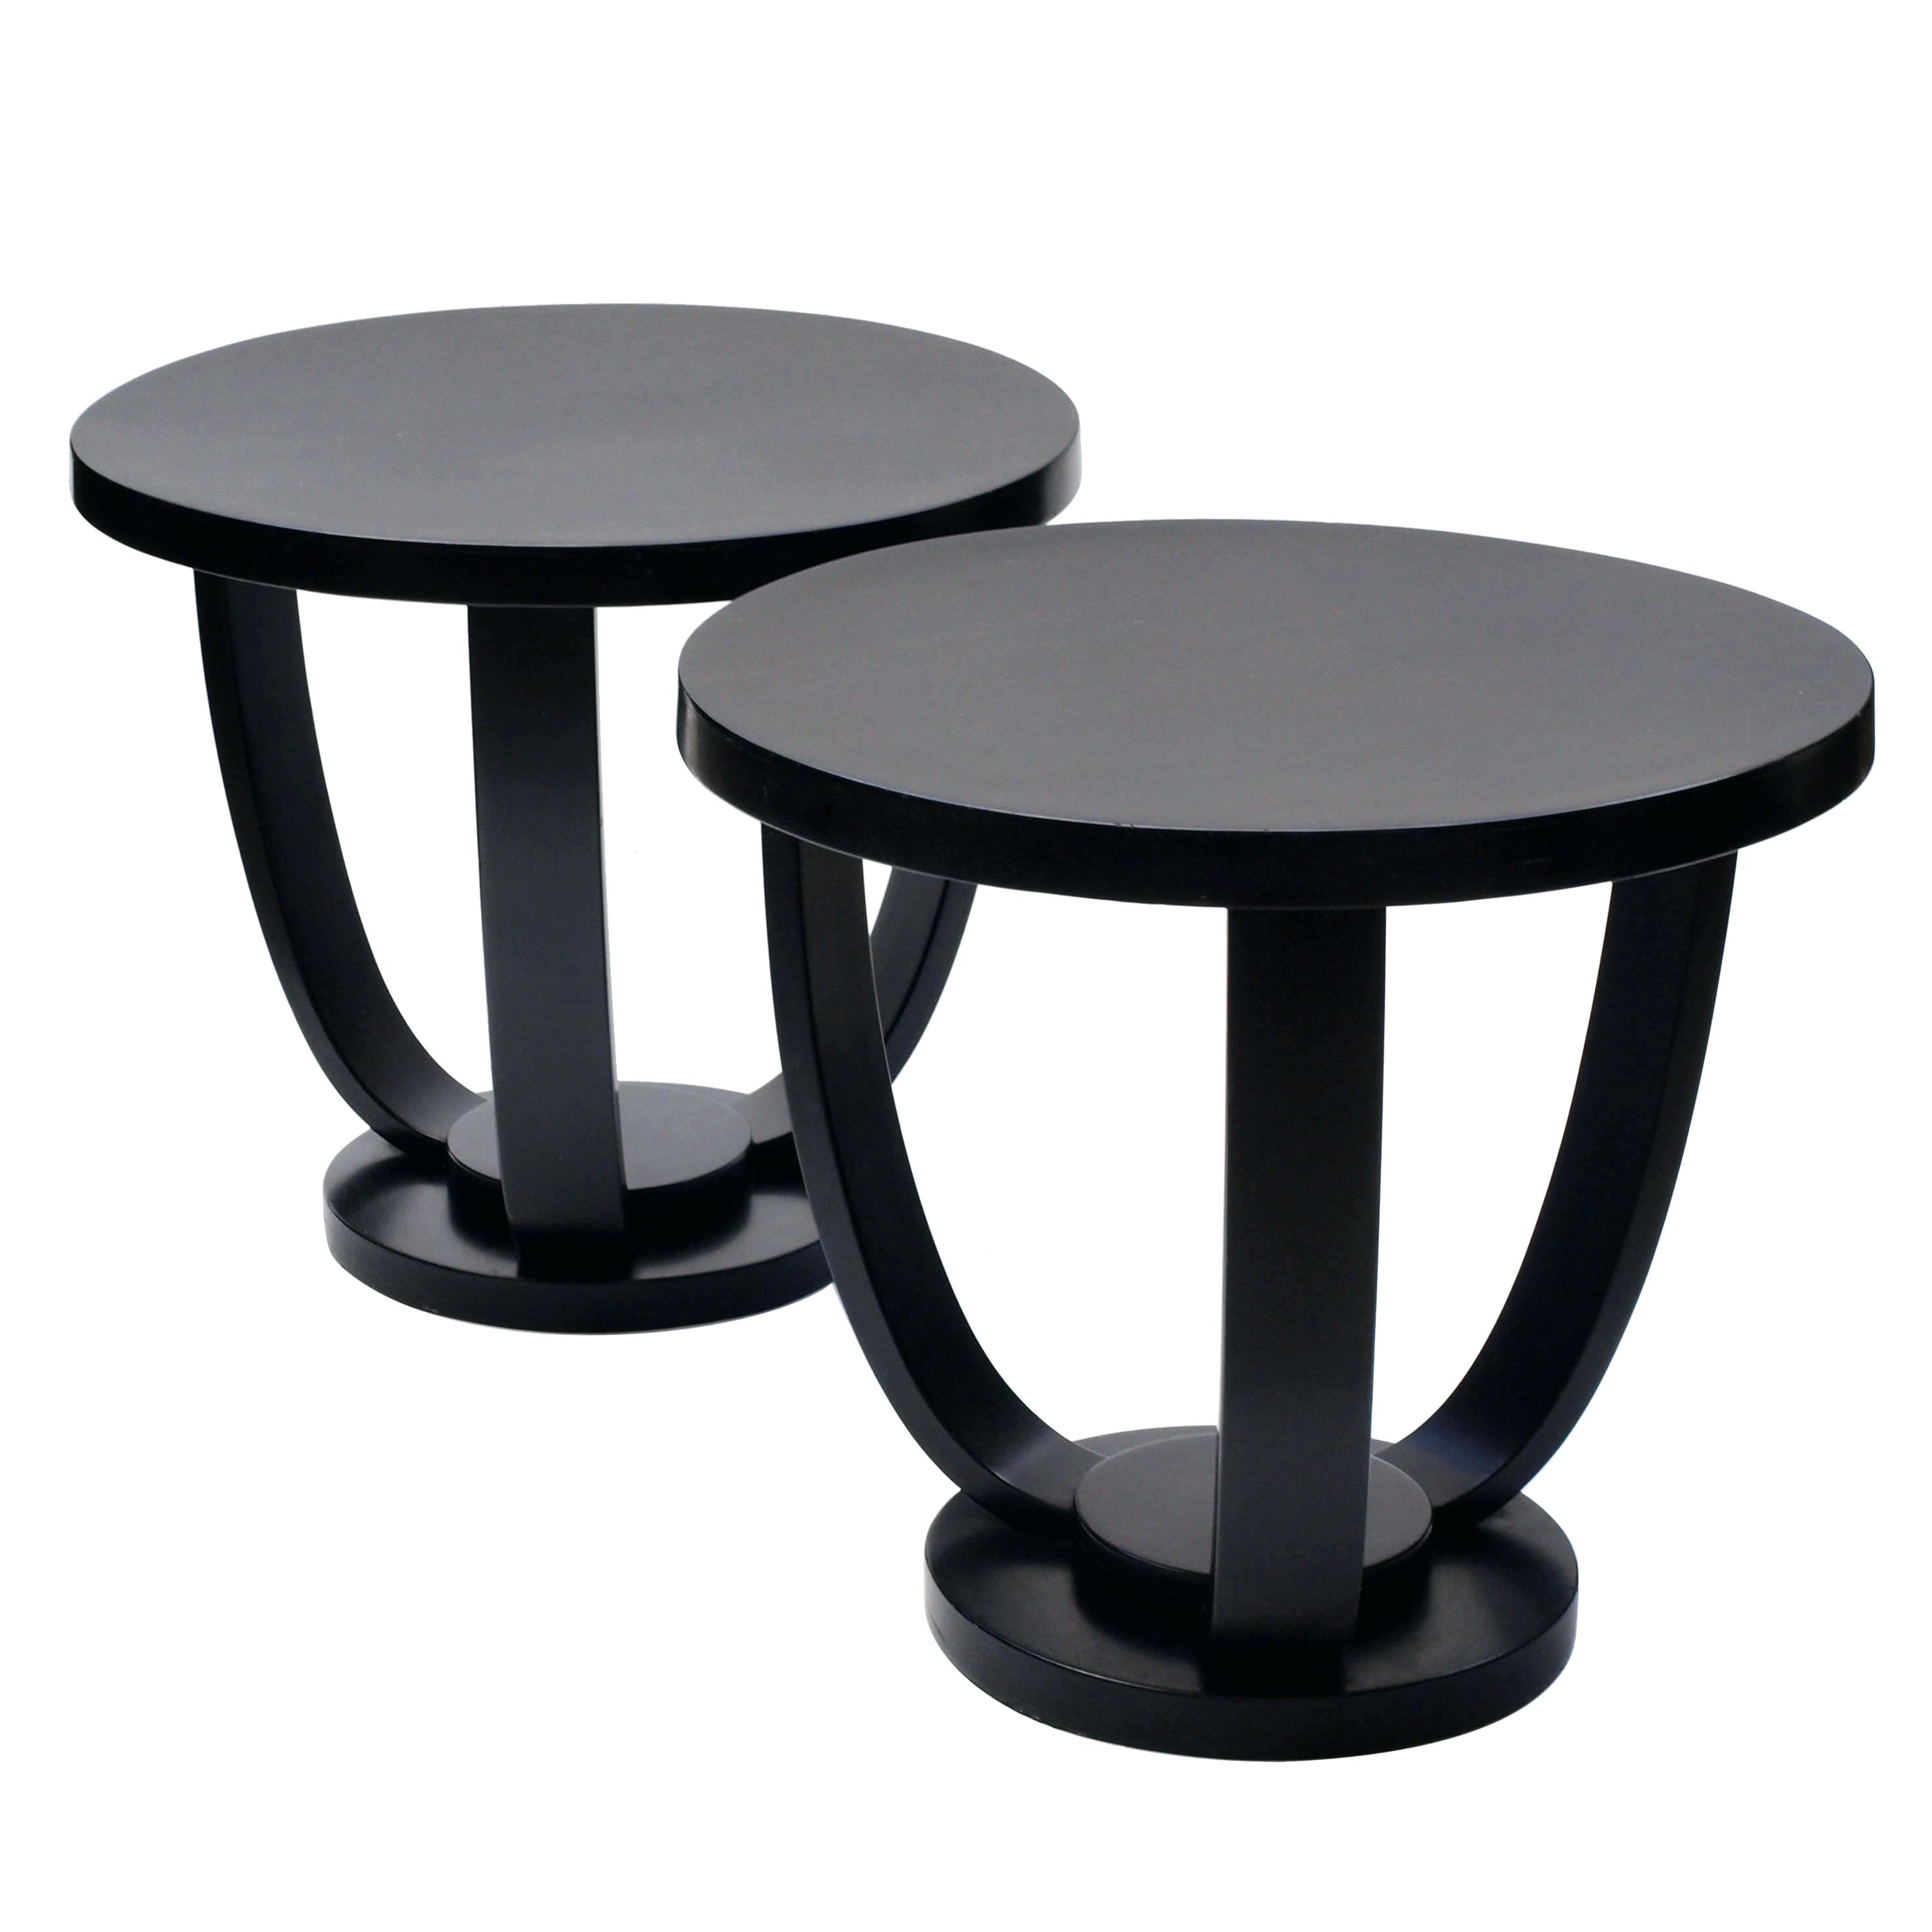 black side table hand made tour and plaster for brown ikea outdoor accent round faux marble coffee clear plexiglass red nest tables resin patio with umbrella hole corner cabinet